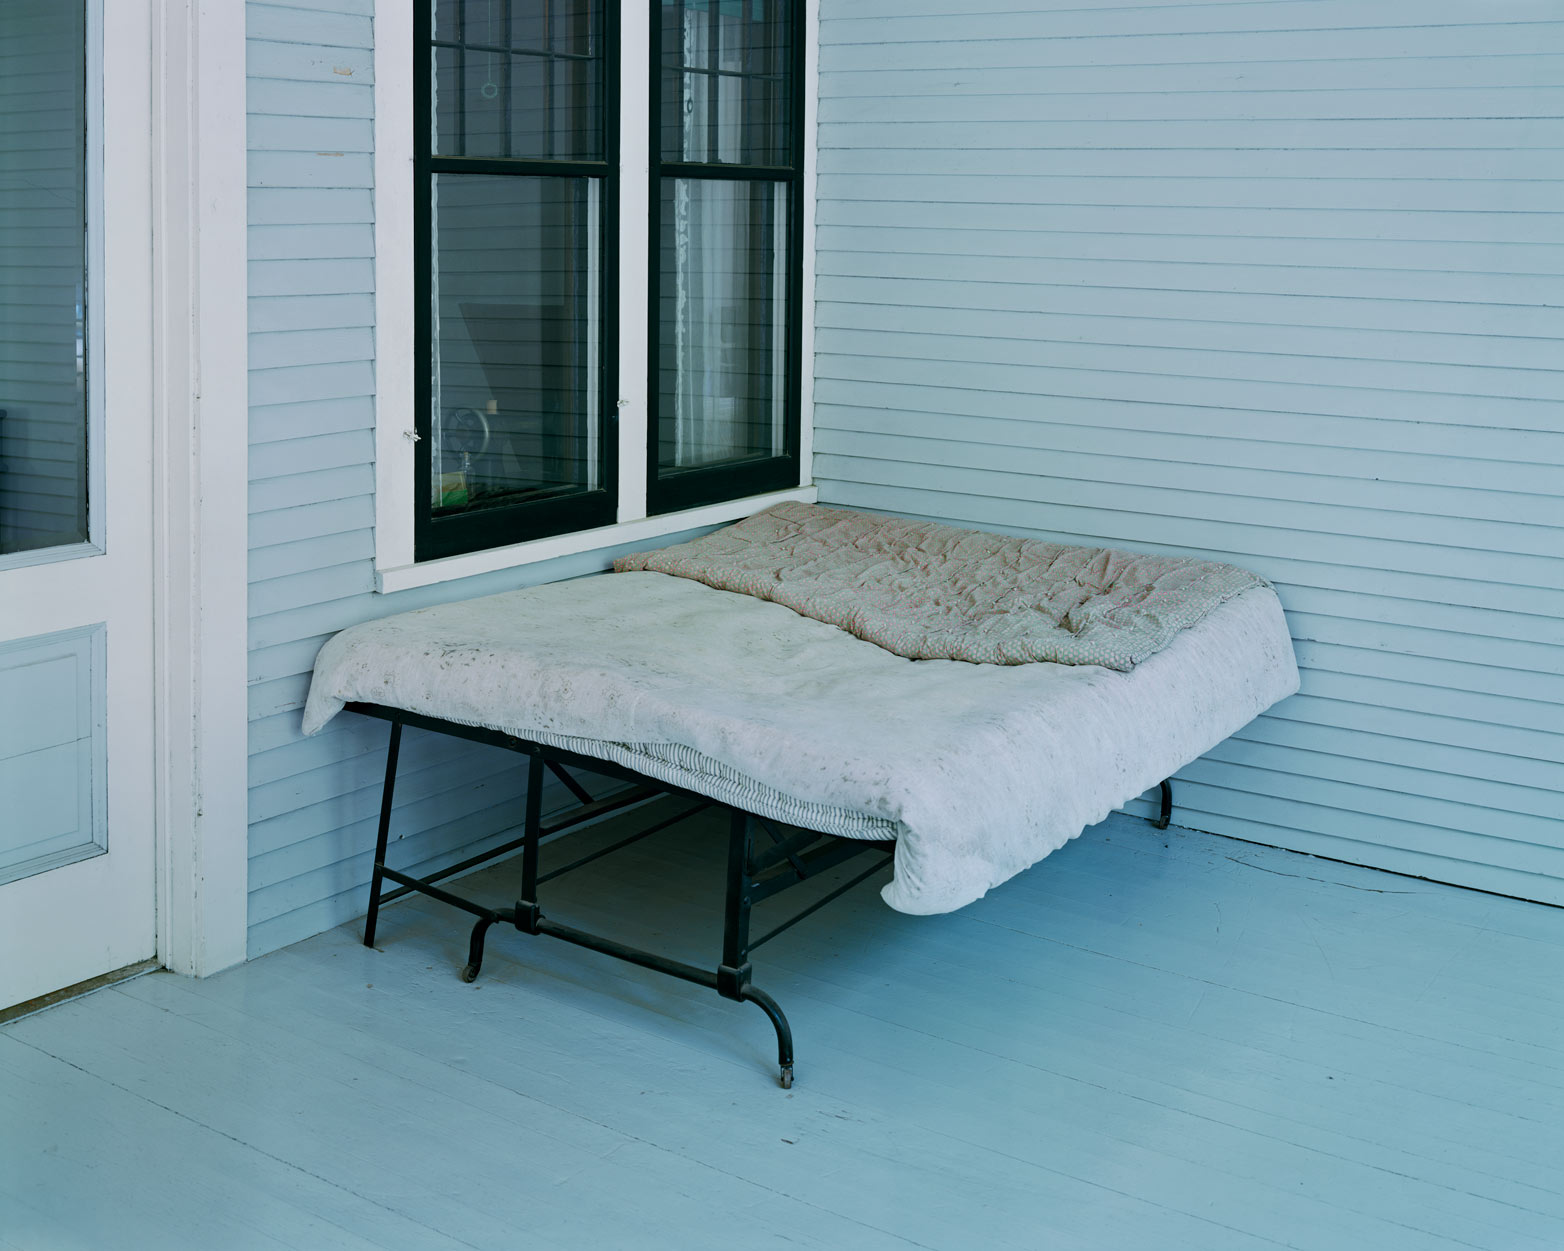 Alec Soth — Sleeping by the Mississippi